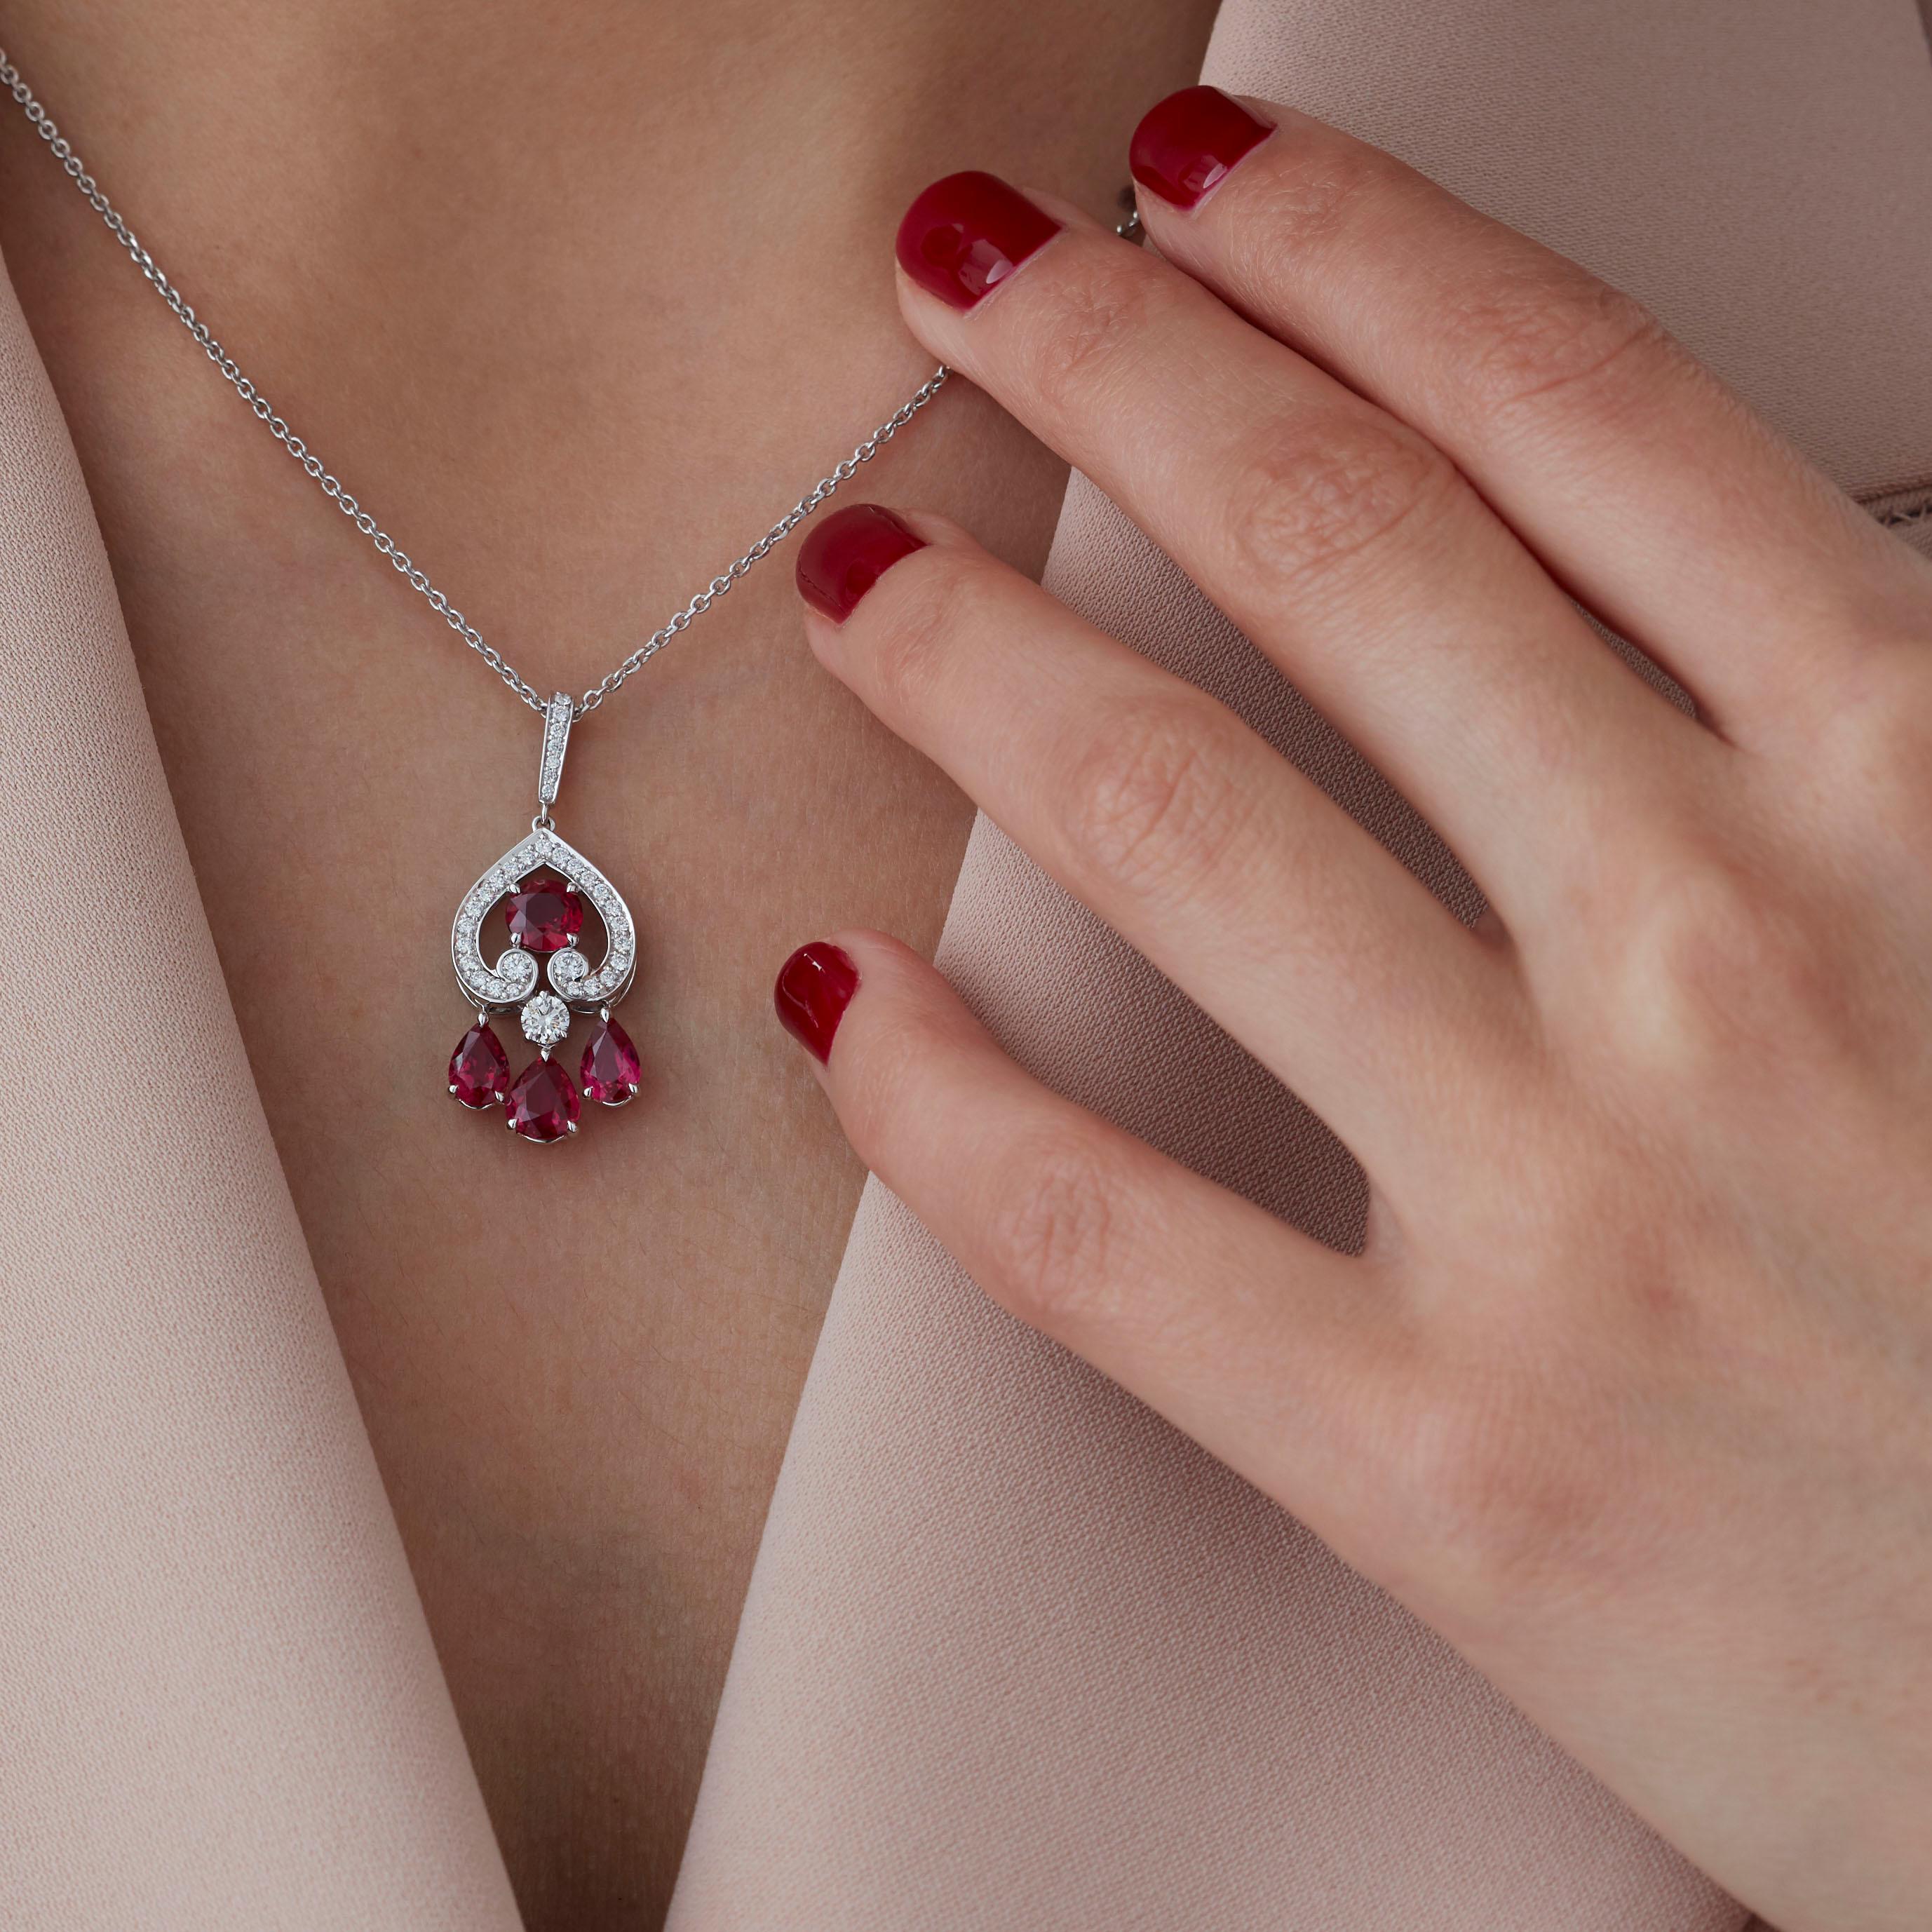 A House of Garrard 18 karat white gold mini drop pendant from the 'Regal Cascade; collection, set with round and pear shape rubies and round white diamonds.

1 round ruby
3 pear shape rubies
34 round white diamonds weighing: 0.44cts

Additional